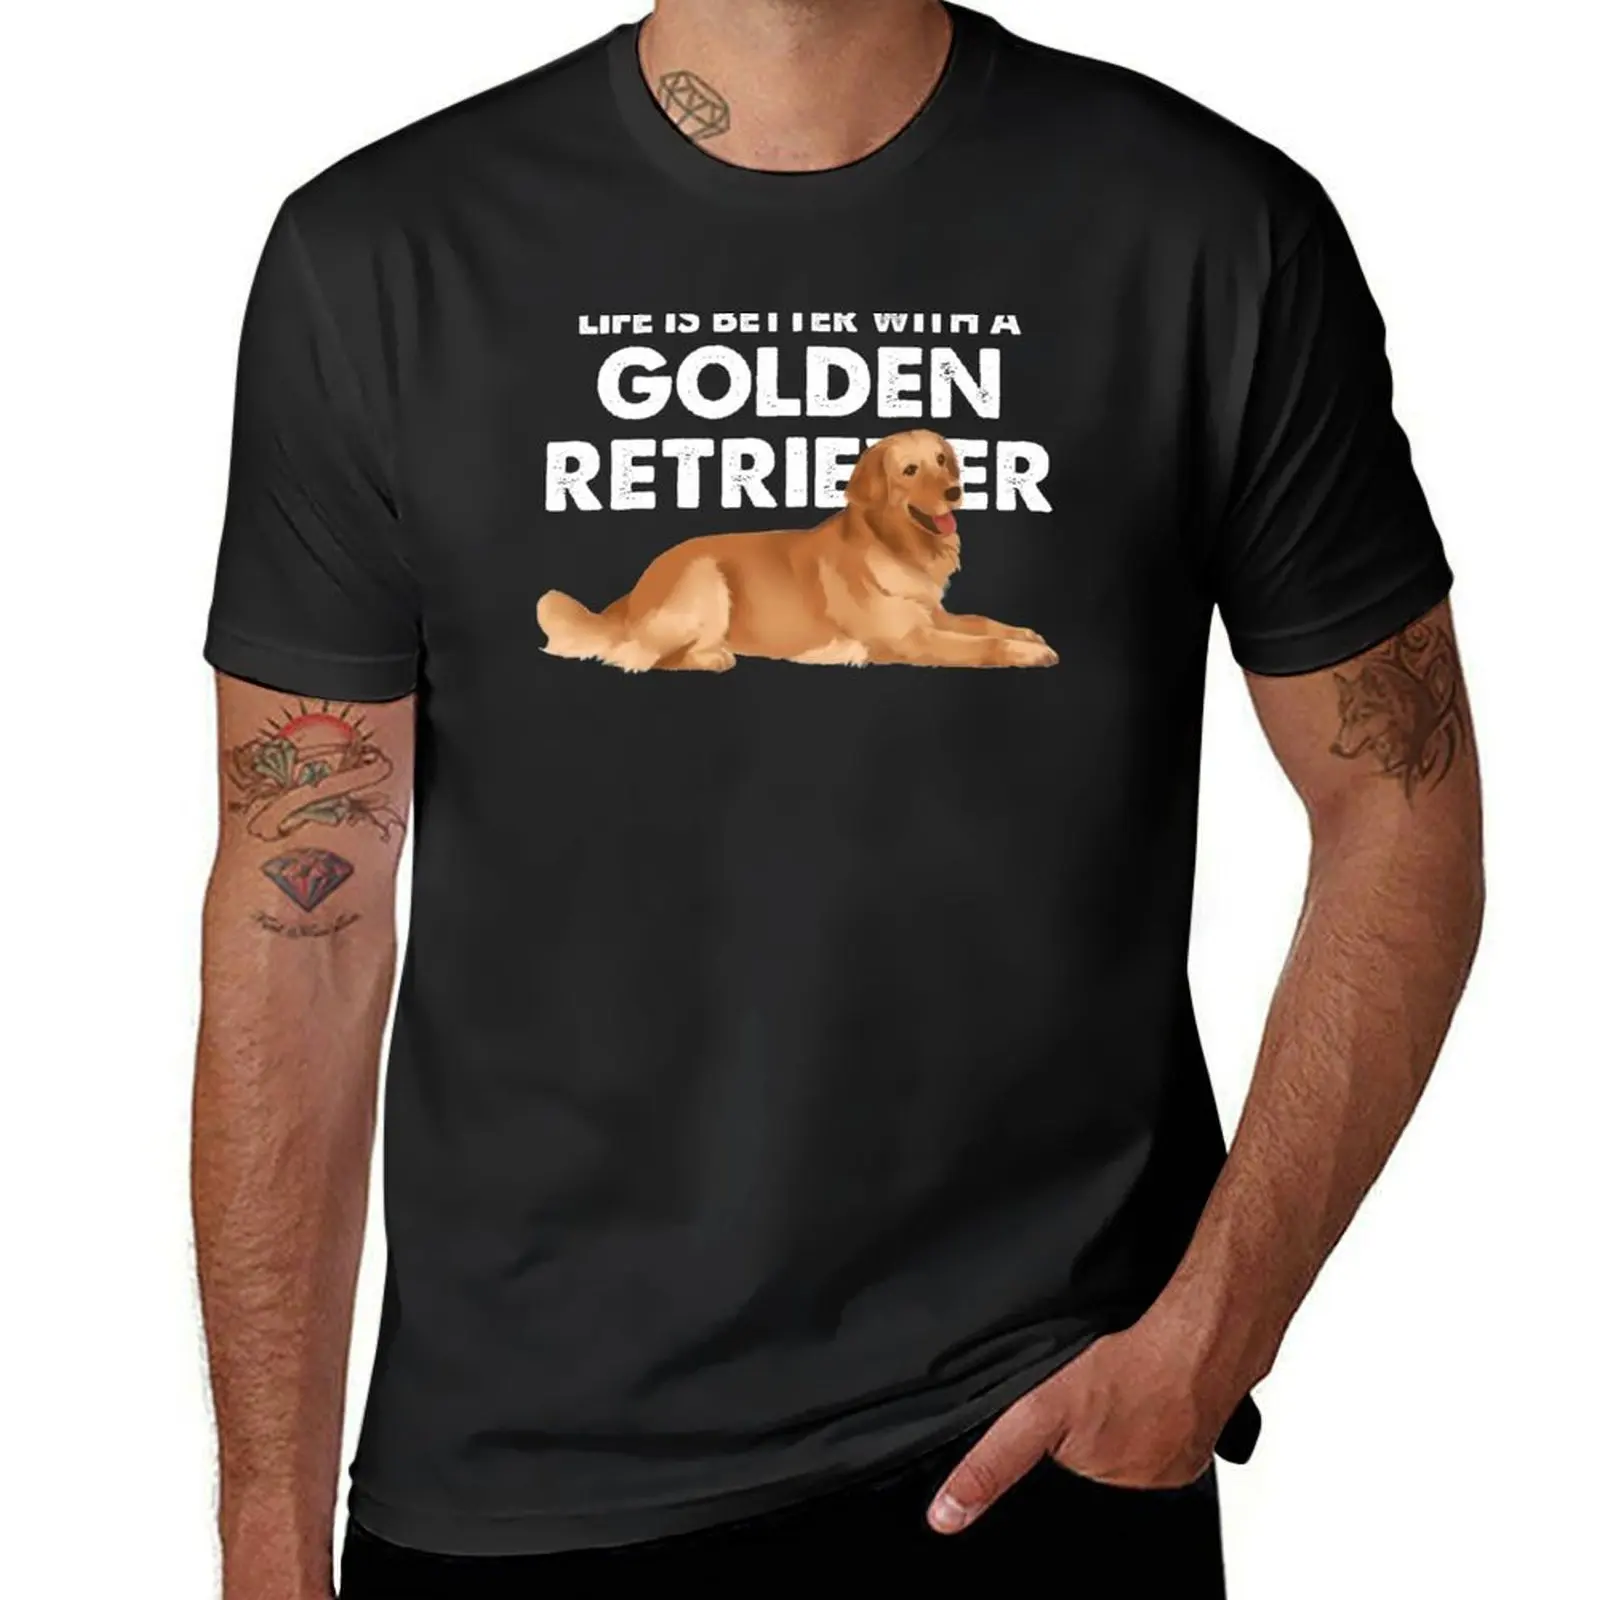 

Life Is Better With A Golden Retriever T-shirt Short sleeve tee shirts graphic tees mens white t shirts